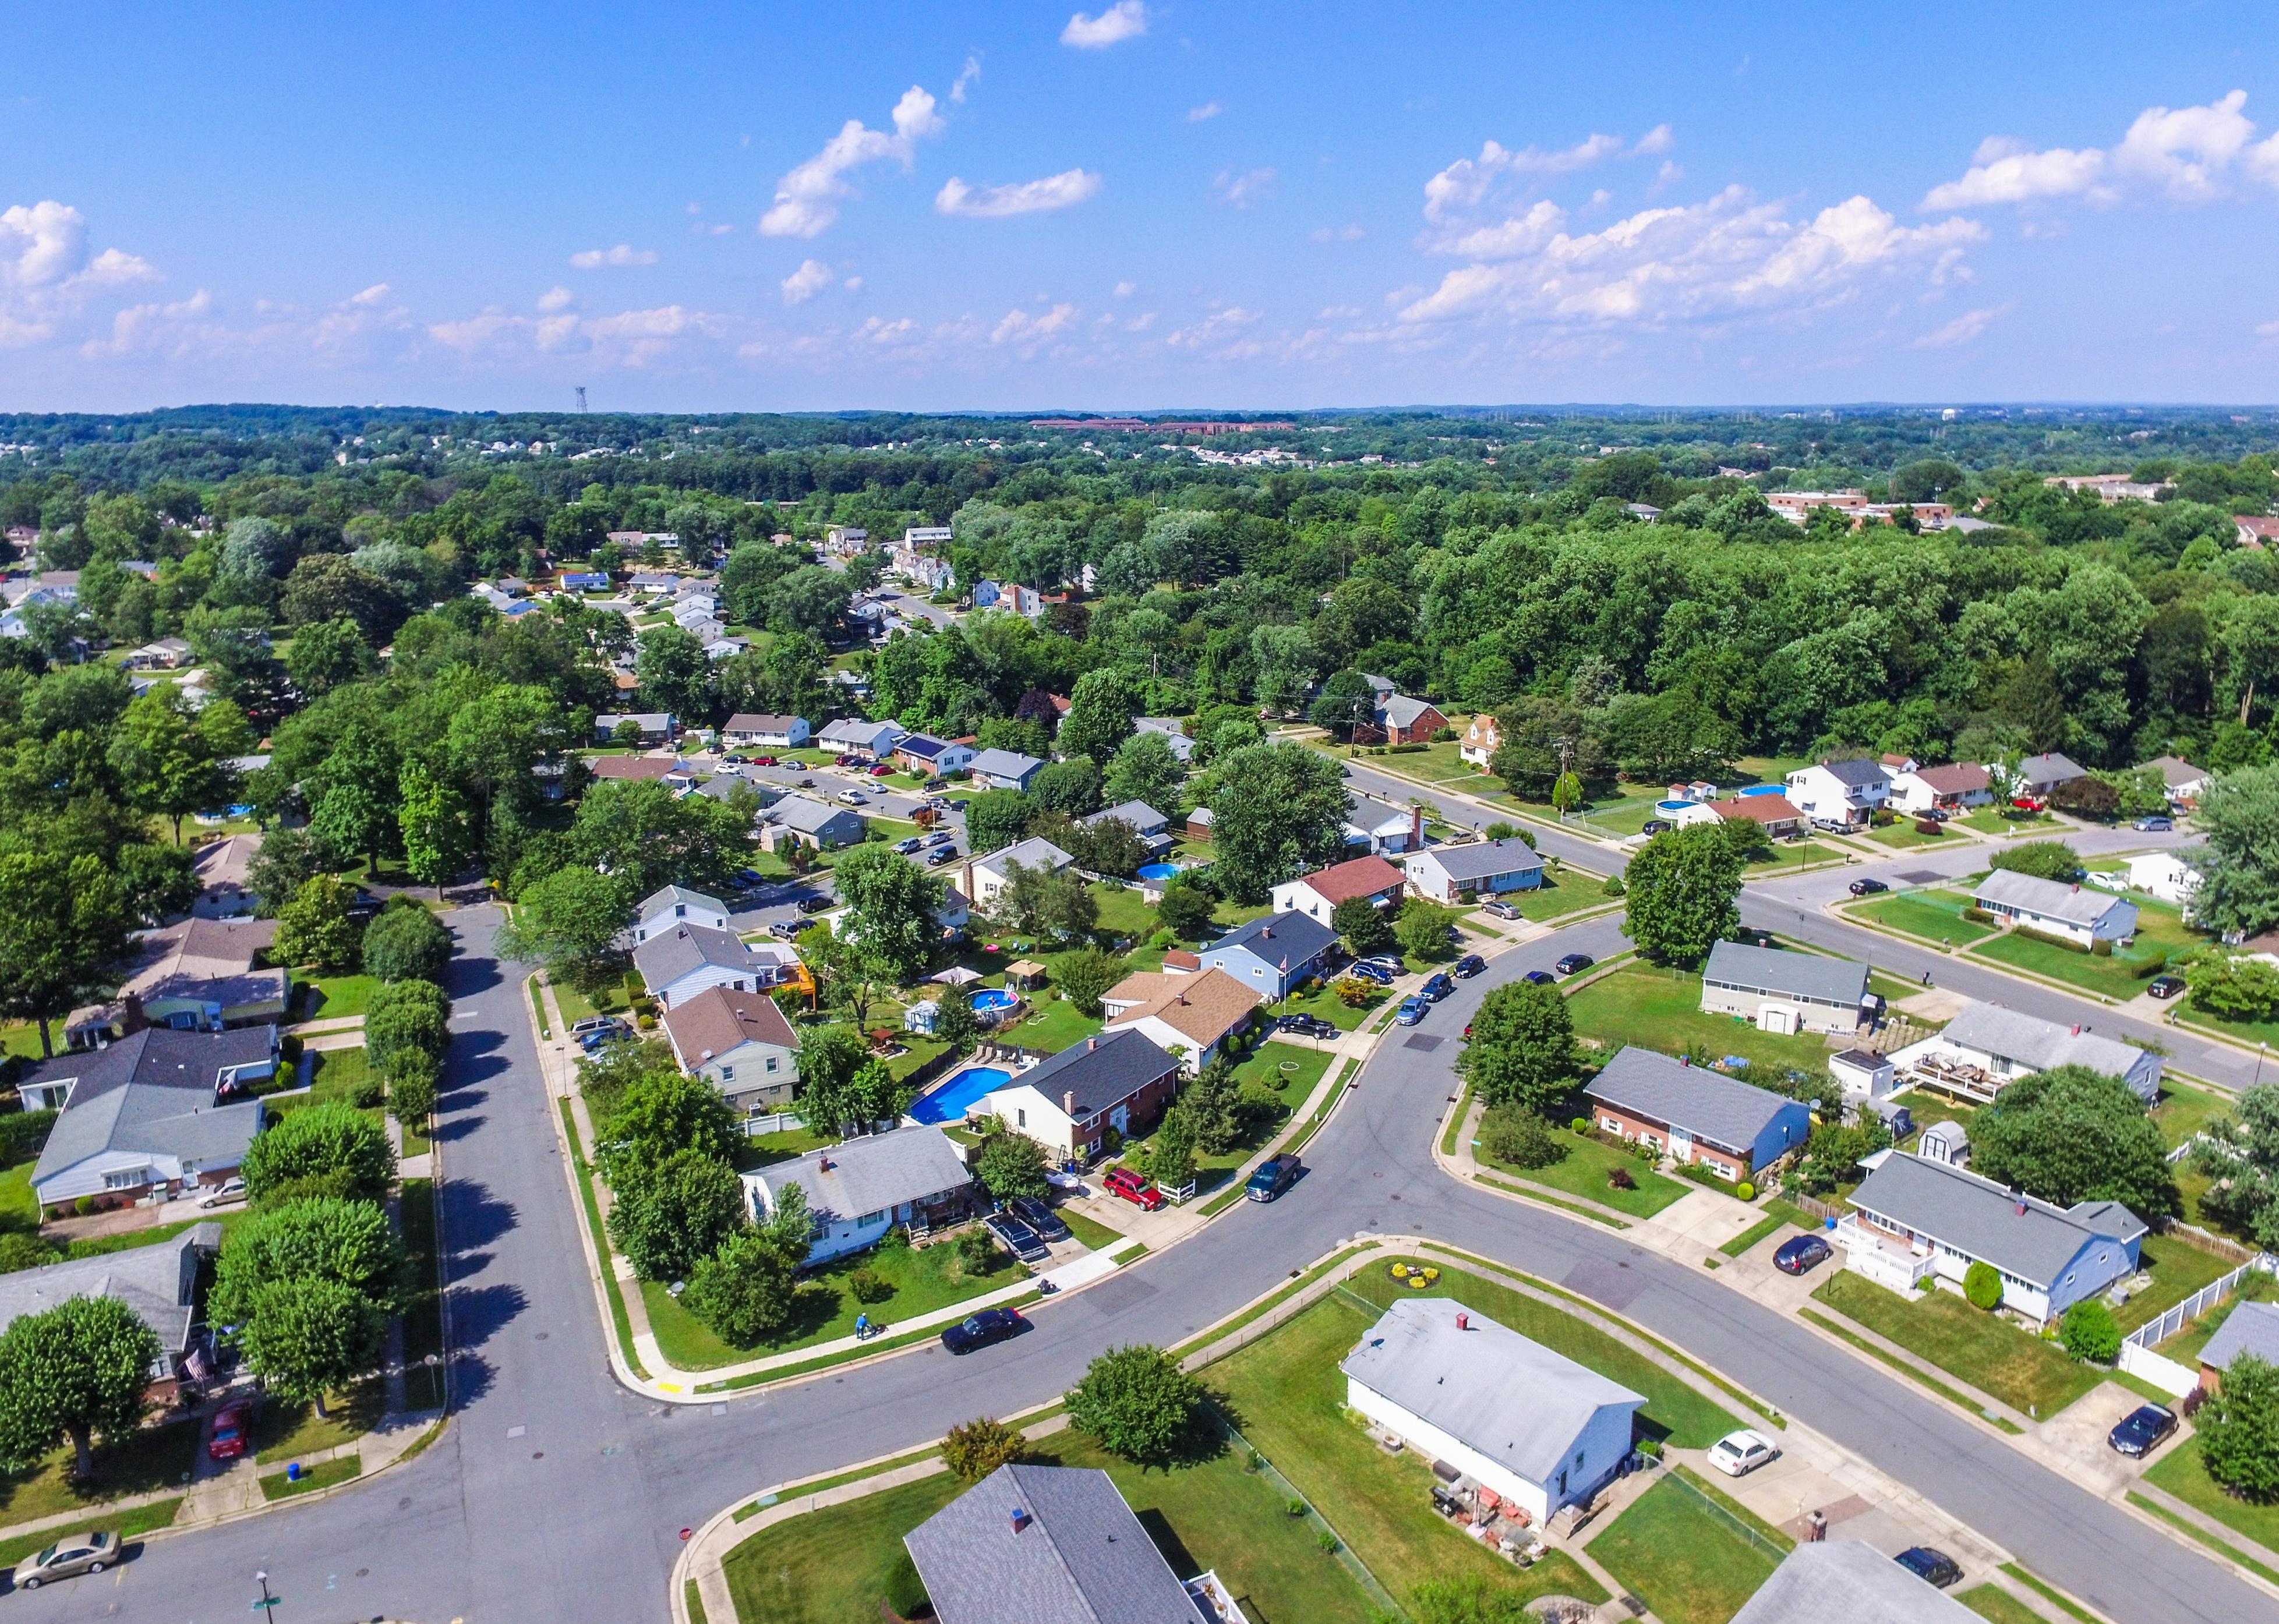 Aerial view of a neighborhood in Maryland.